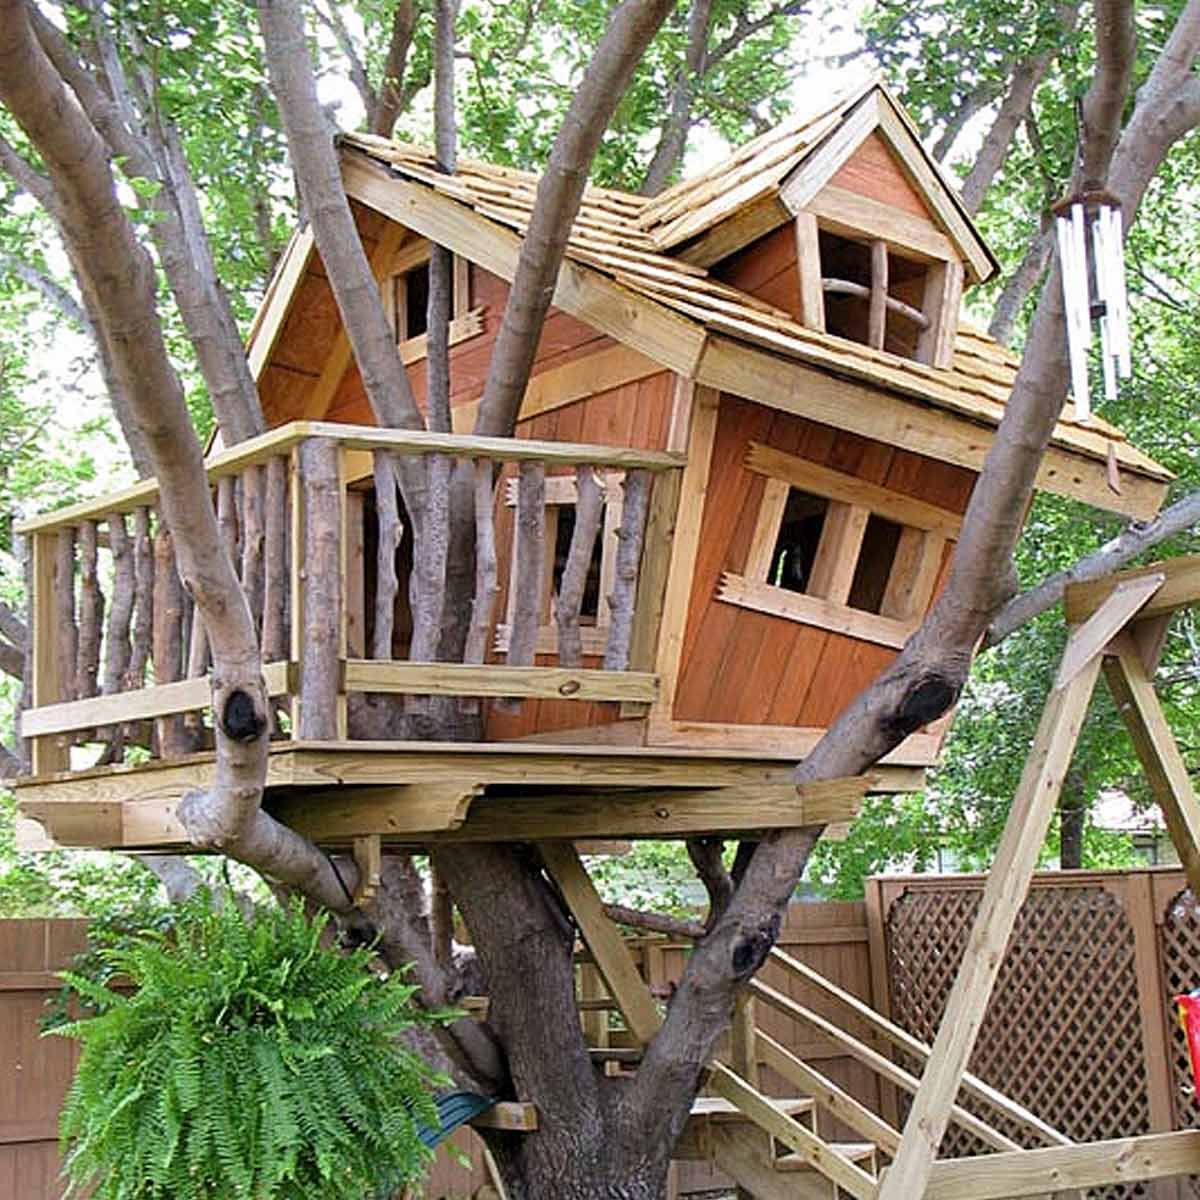 8 Tips for Building a Treehouse | Family Handyman